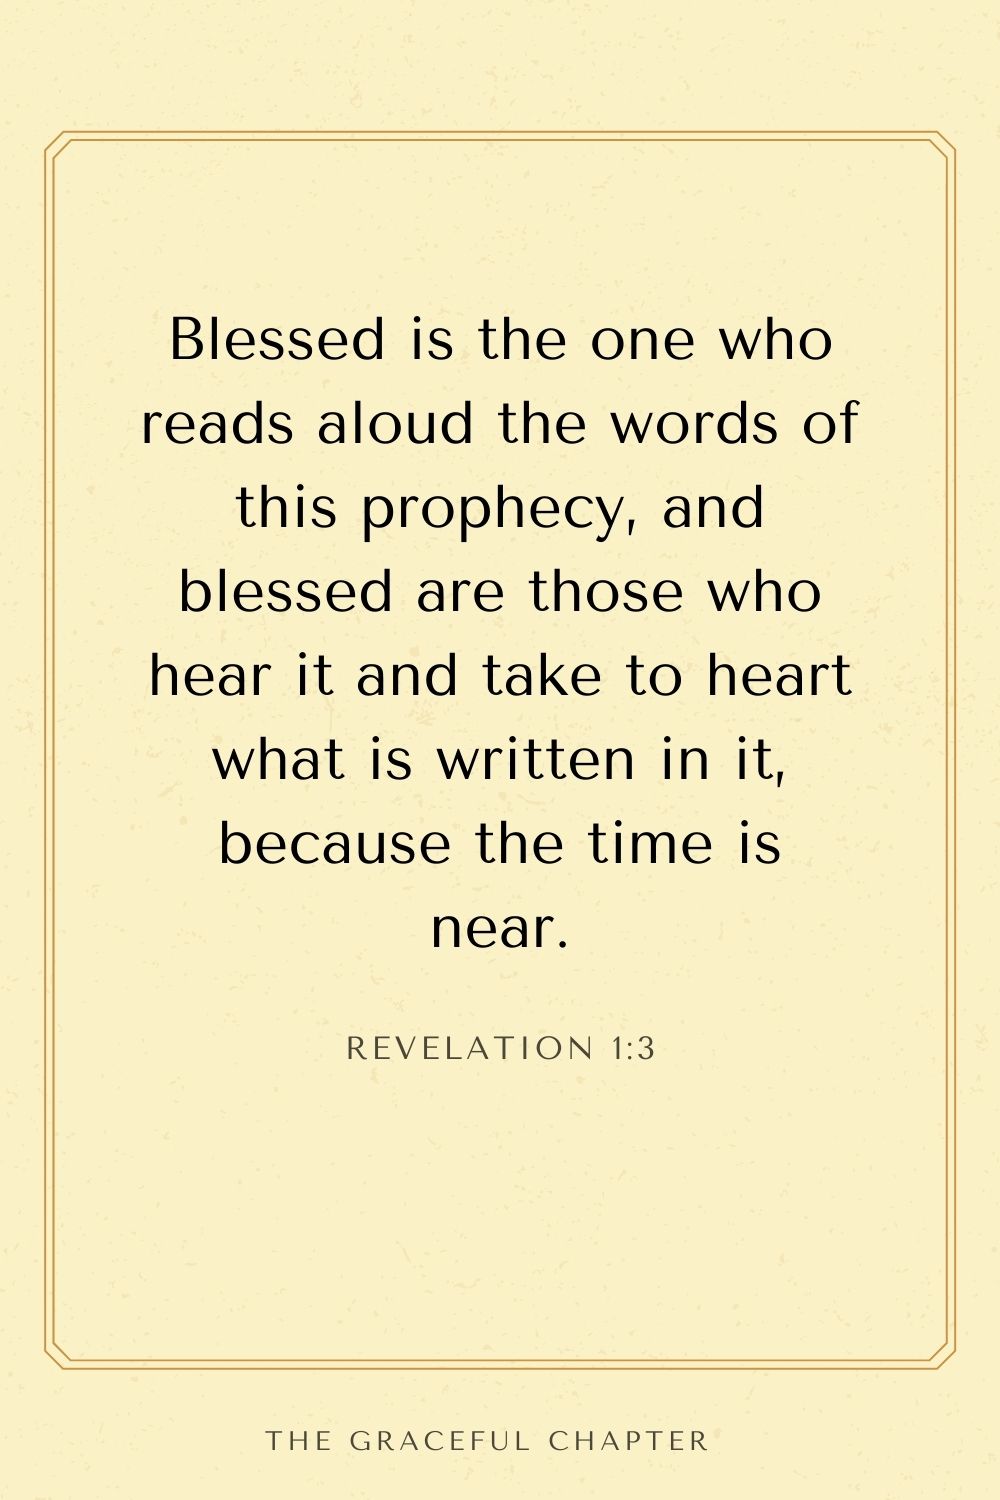 Blessed is the one who reads aloud the words of this prophecy, and blessed are those who hear it and take to heart what is written in it, because the time is near. Revelation 1:3